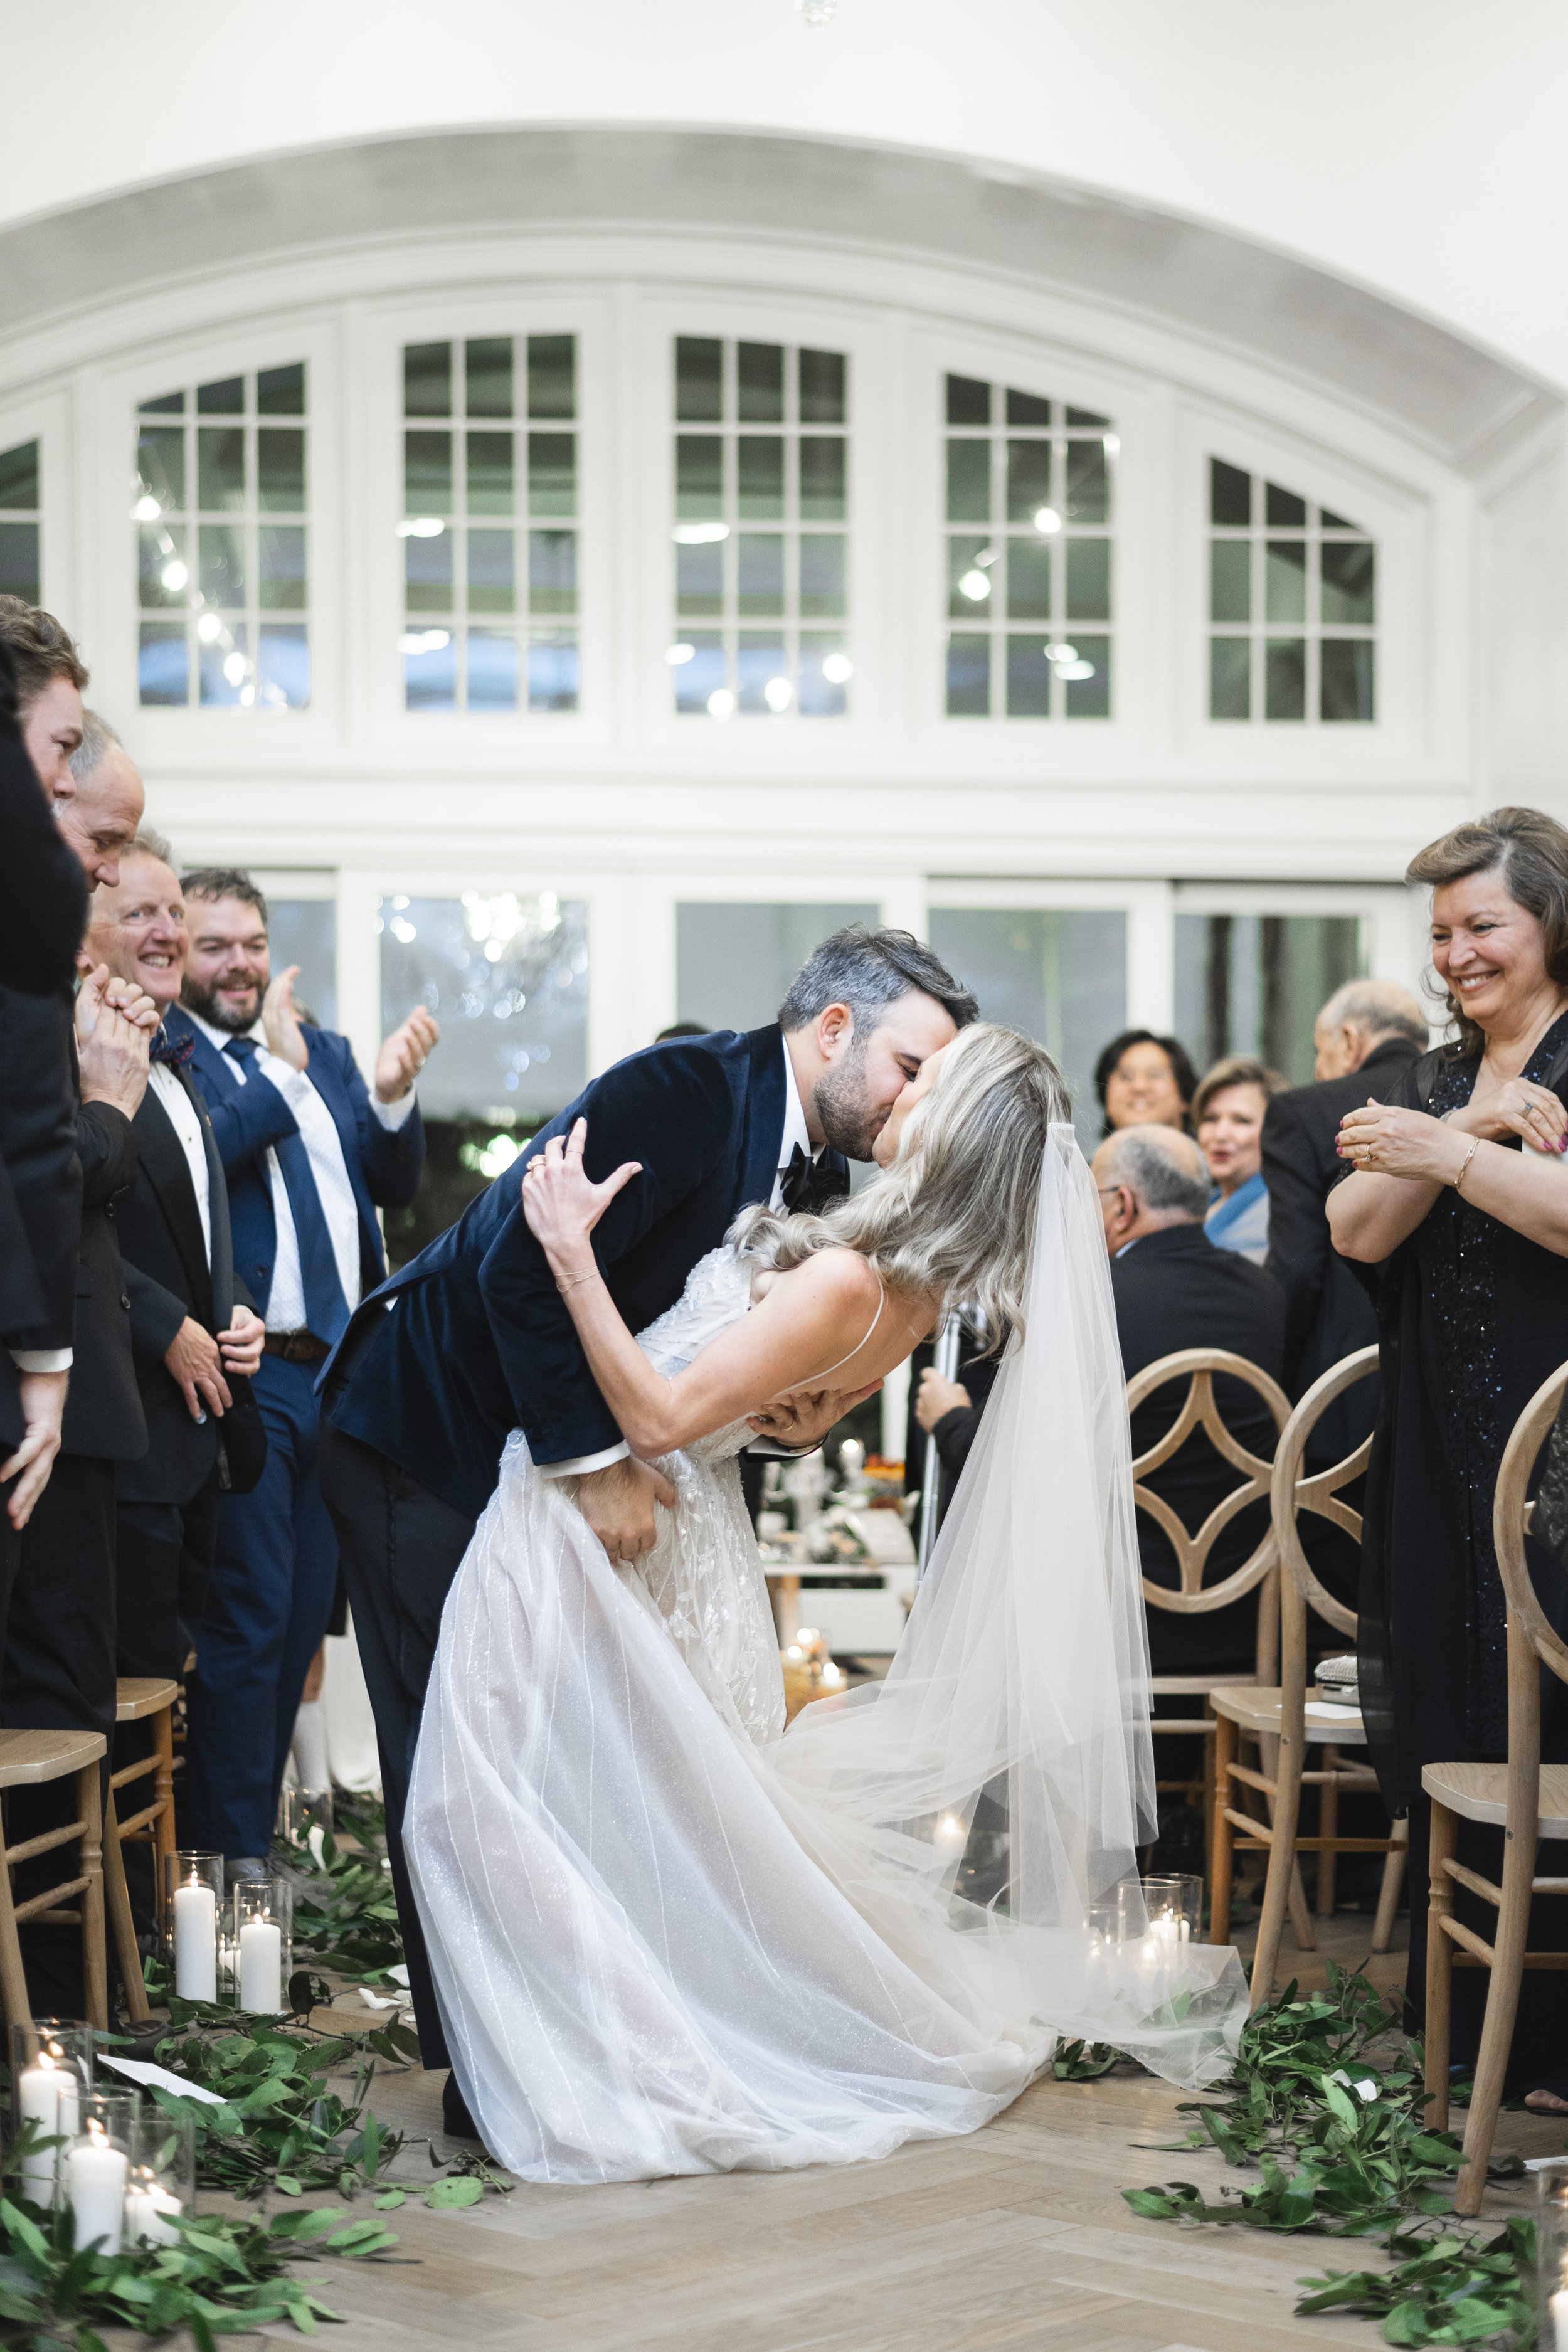  Savanna Richardson Photography captures a bride and groom kissing in the aisle at their wedding. she said I do #SavannaRichardsonPhotography #SavannaRichardsonWeddings #NYEwedding #magicalwedding #snowywedding #holidaywedding #married 